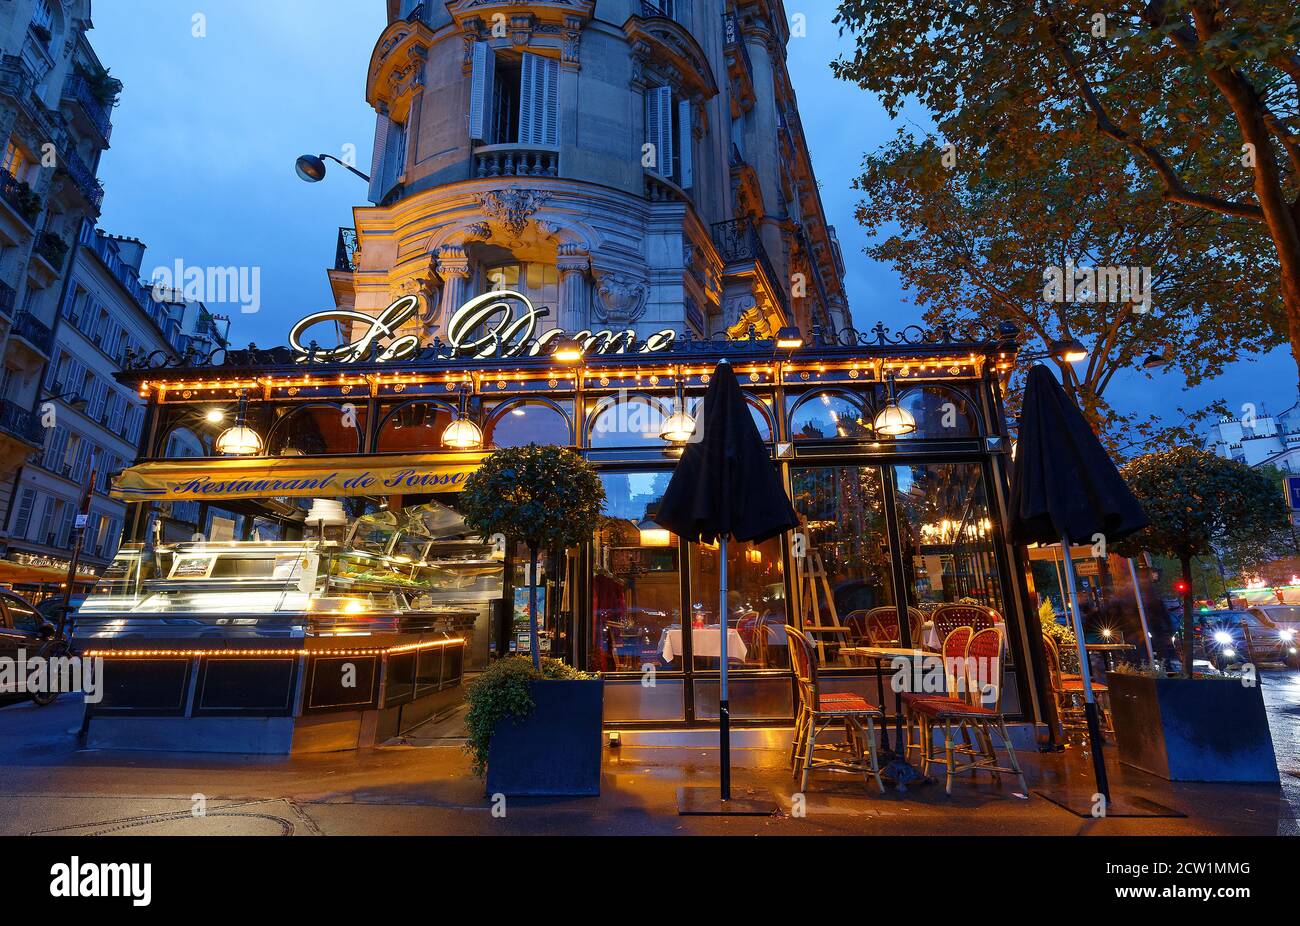 The famous restaurant Le Dome located on Montparnasse boulevard in ...